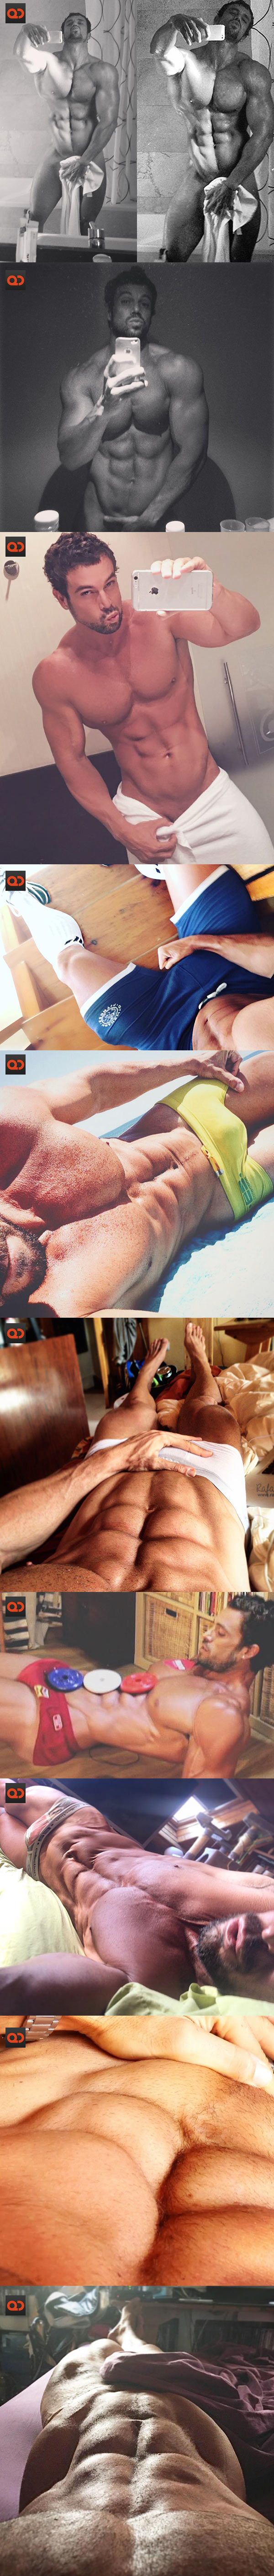 Rafa Martín, Instagram Star And Fitness Model, Extra Long Cock Exposed In Leaked Nudes!